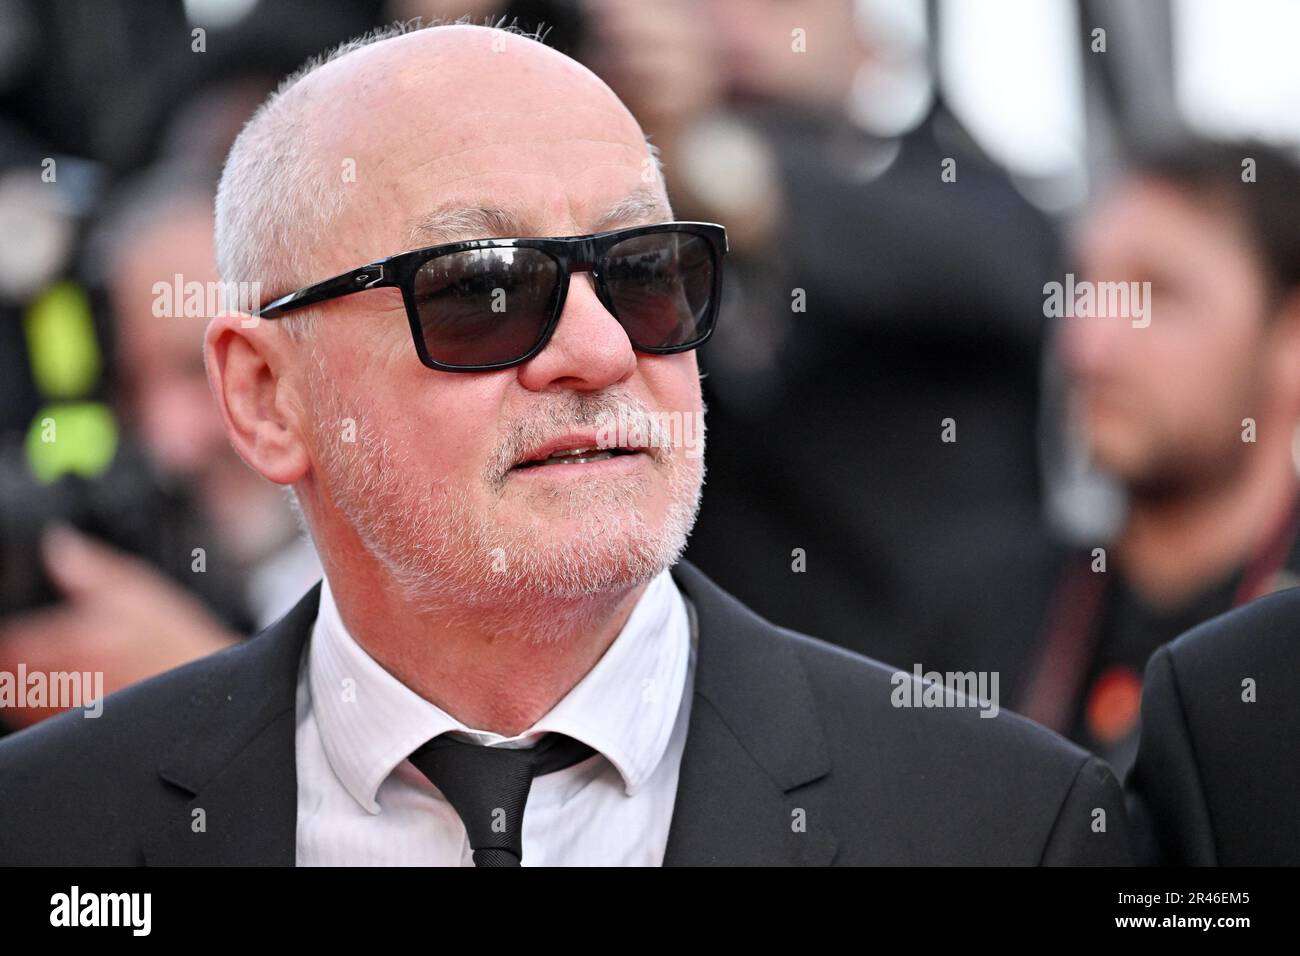 Cannes, France. 26th May, 2023. Barry Ackroyd at the premiere of the movie The Old Oak during 76th Cannes Film Festival in Cannes, France on May 26, 2023. Photo by Julien Reynaud/APS-Medias/ABACAPRESS.COM Credit: Abaca Press/Alamy Live News Stock Photo